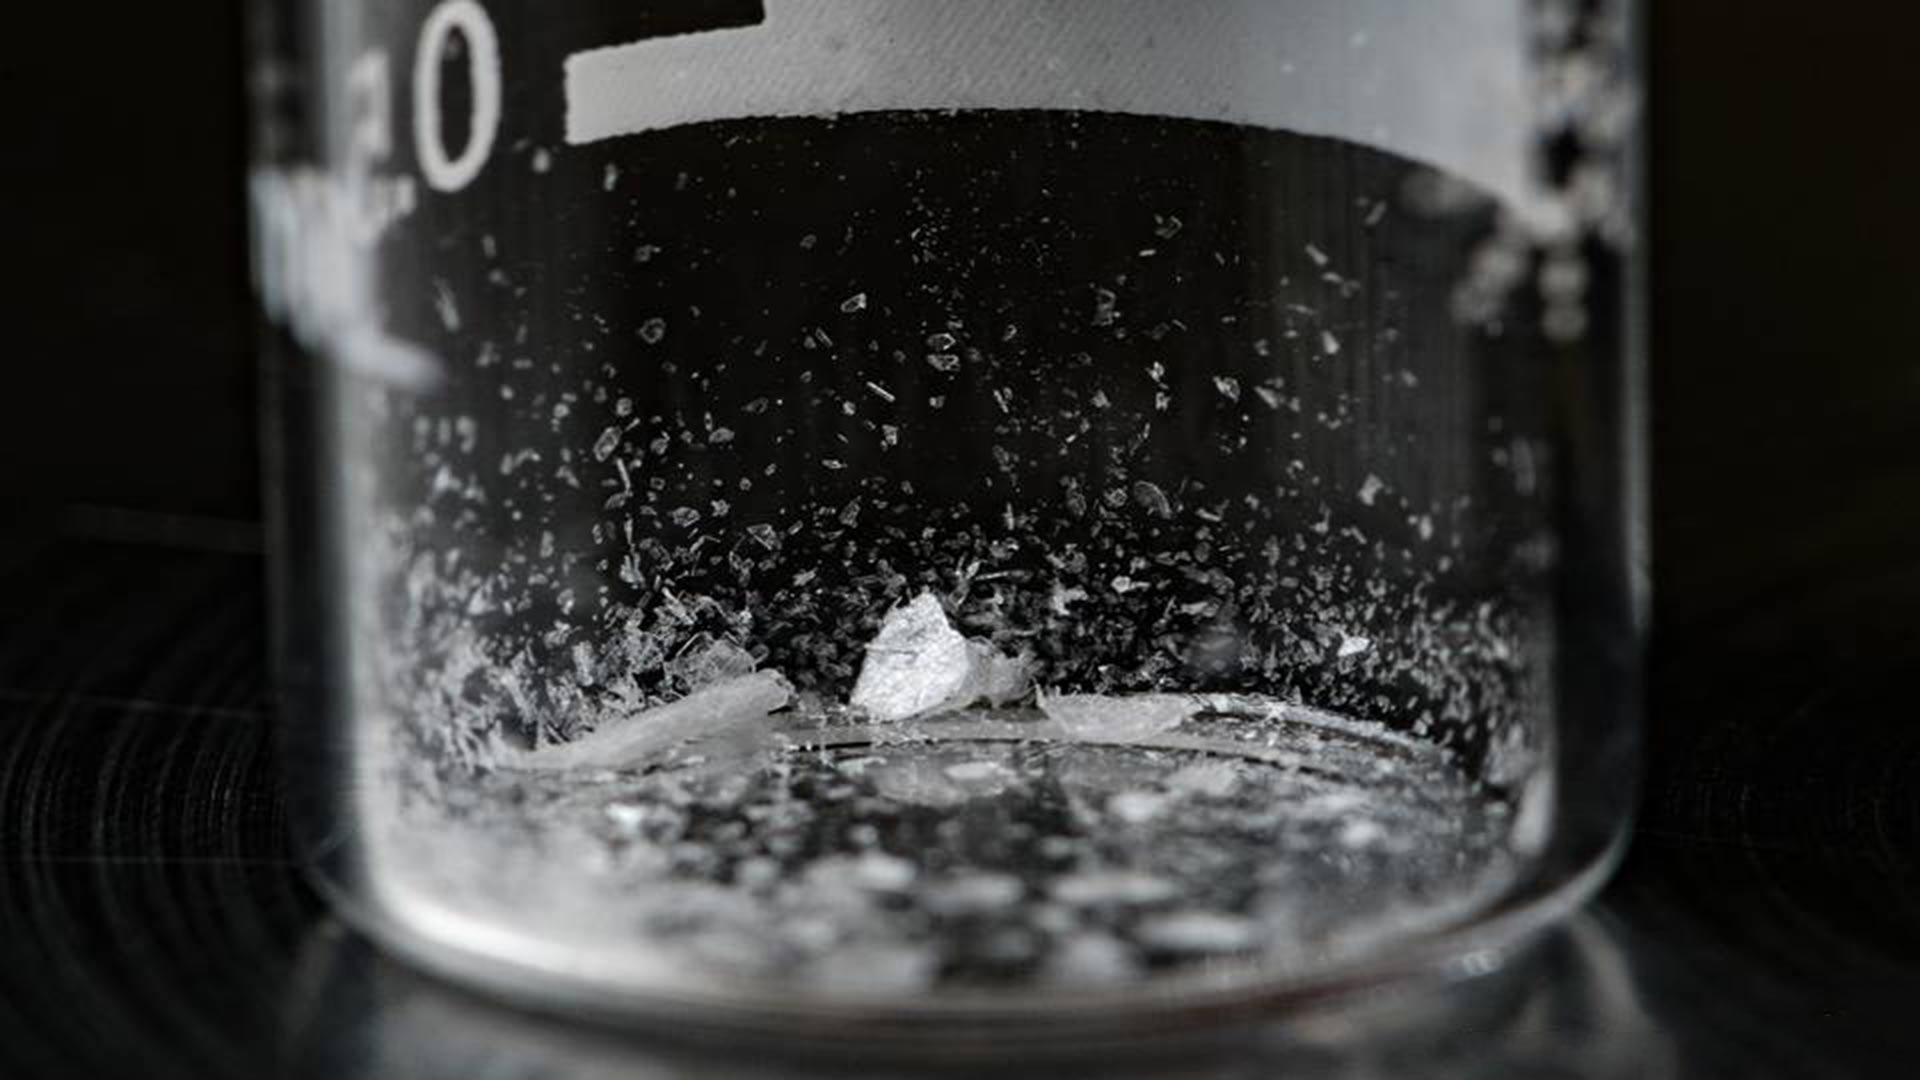 The drug fentanyl is 100 times more potent than morphine, according to the Drug Enforcement Administration.